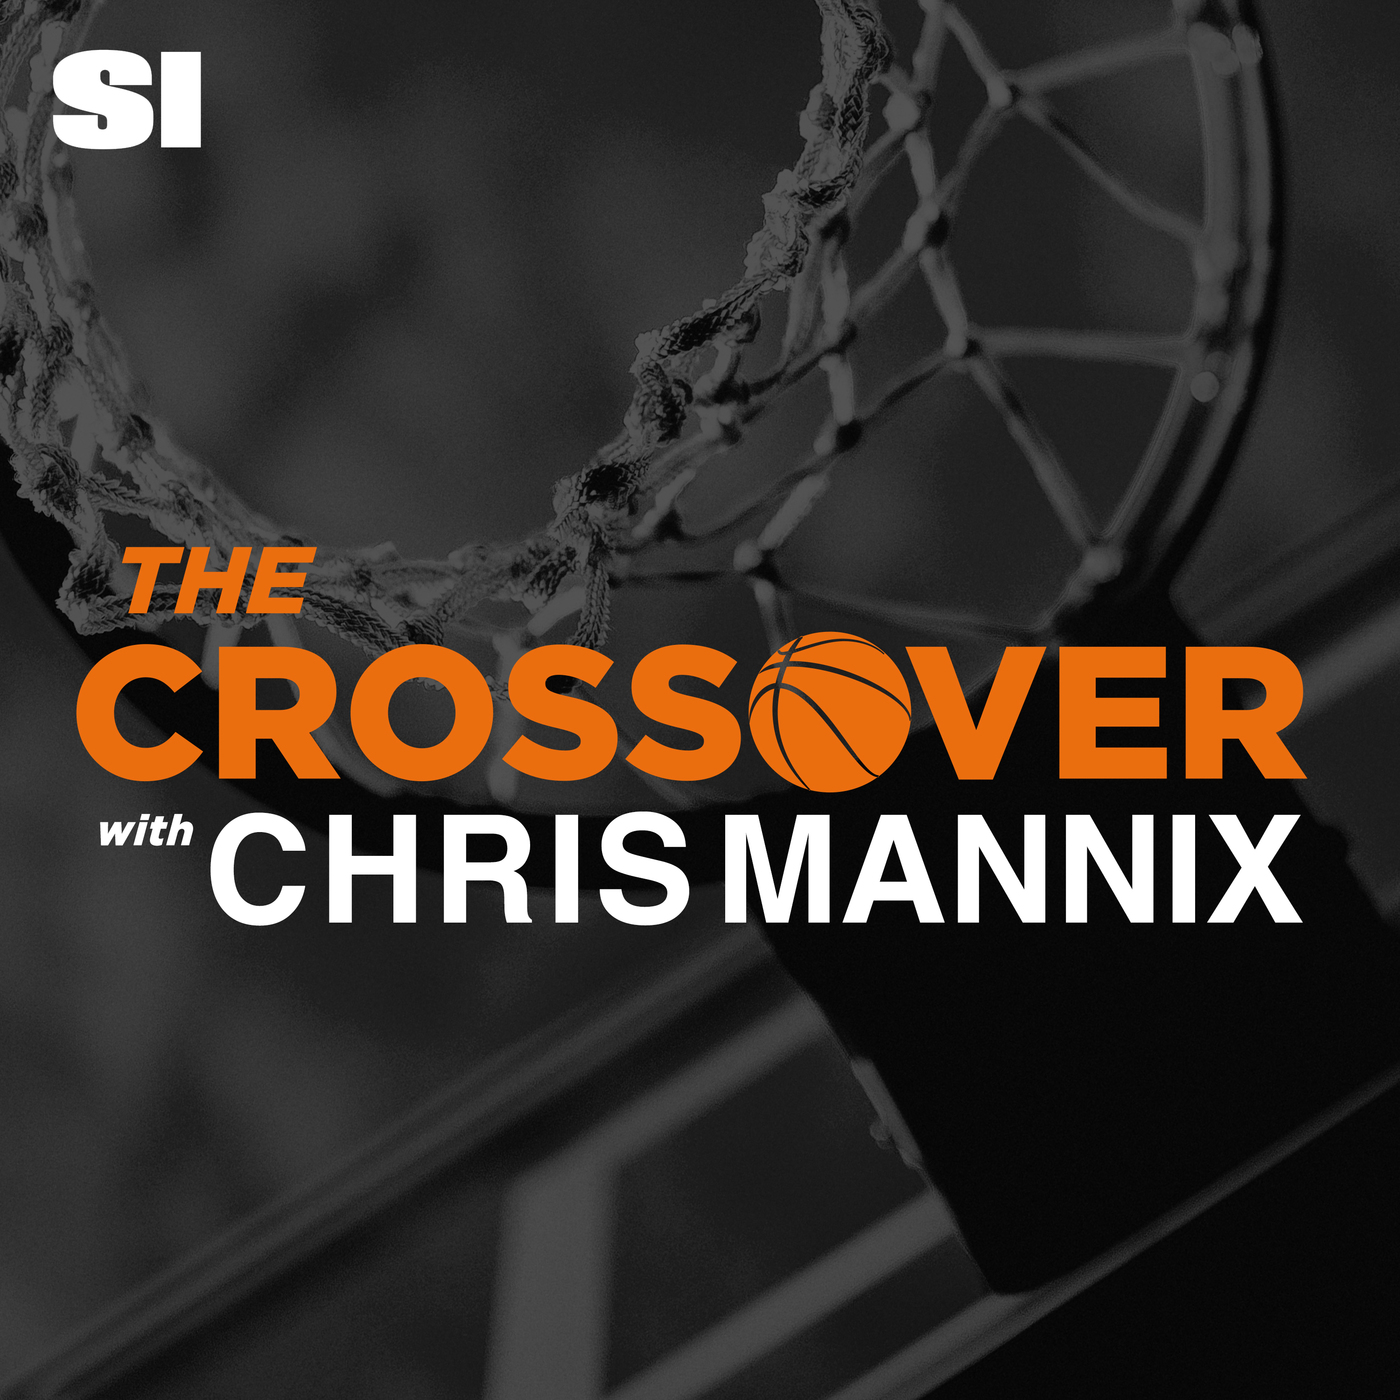 Fresh update on "top 10" discussed on The Crossover NBA Show with Chris Mannix